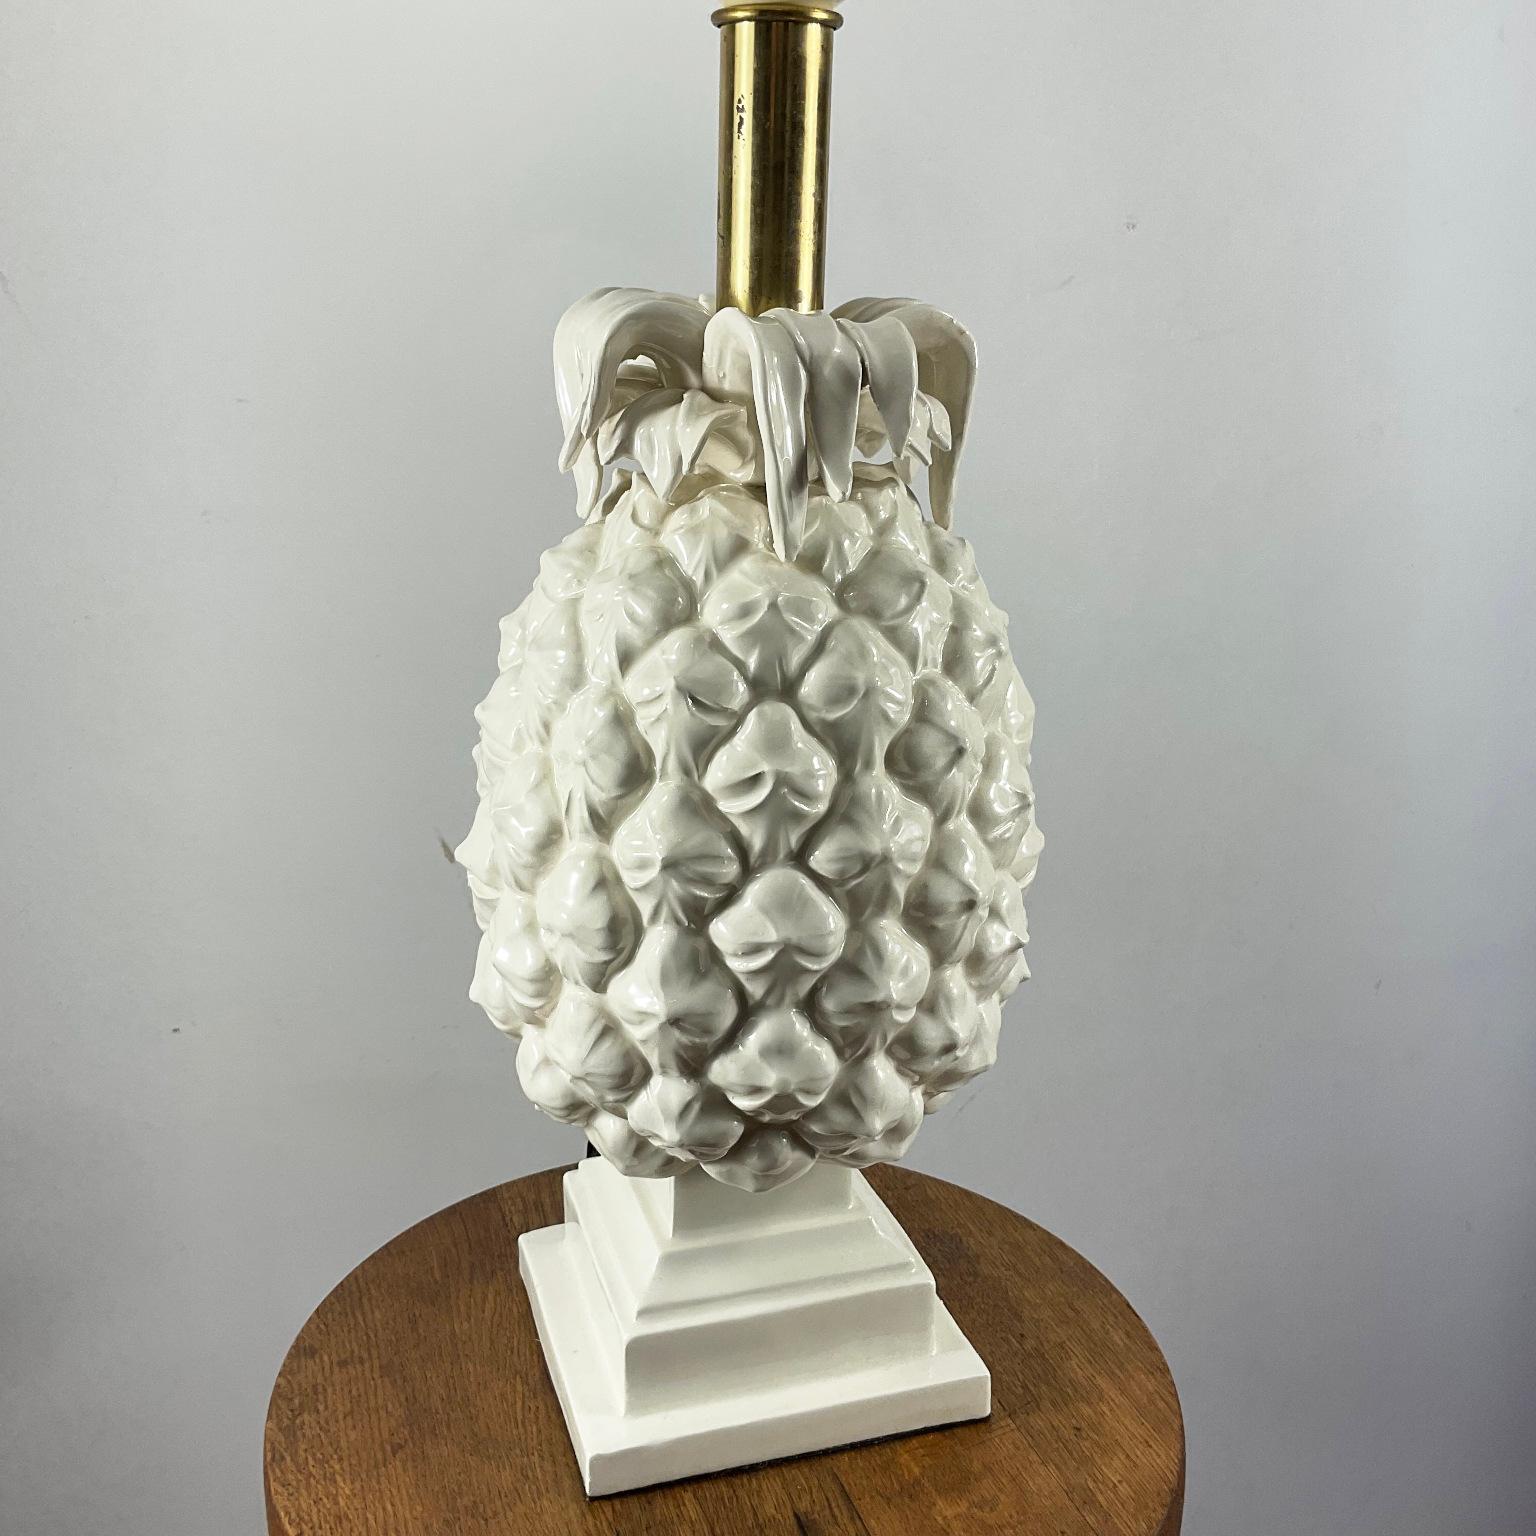 Italian Pineapple Table Lamp in White Glazed Ceramic from Italy 1970s For Sale